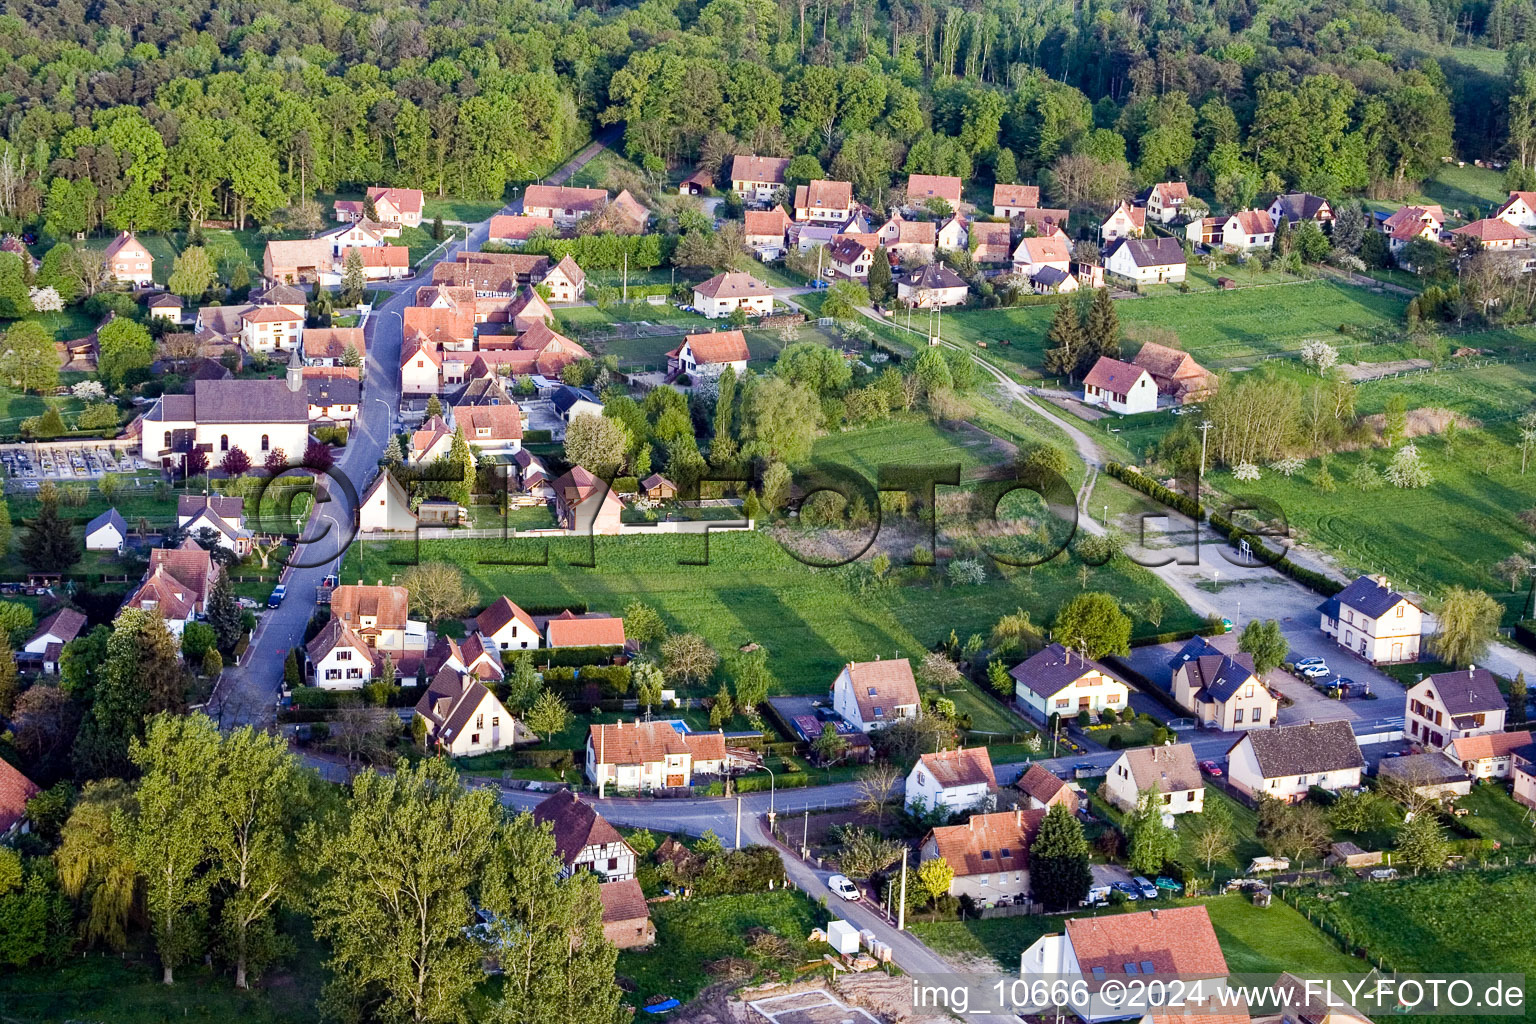 Town View of the streets and houses of the residential areas in Biblisheim in Grand Est, France